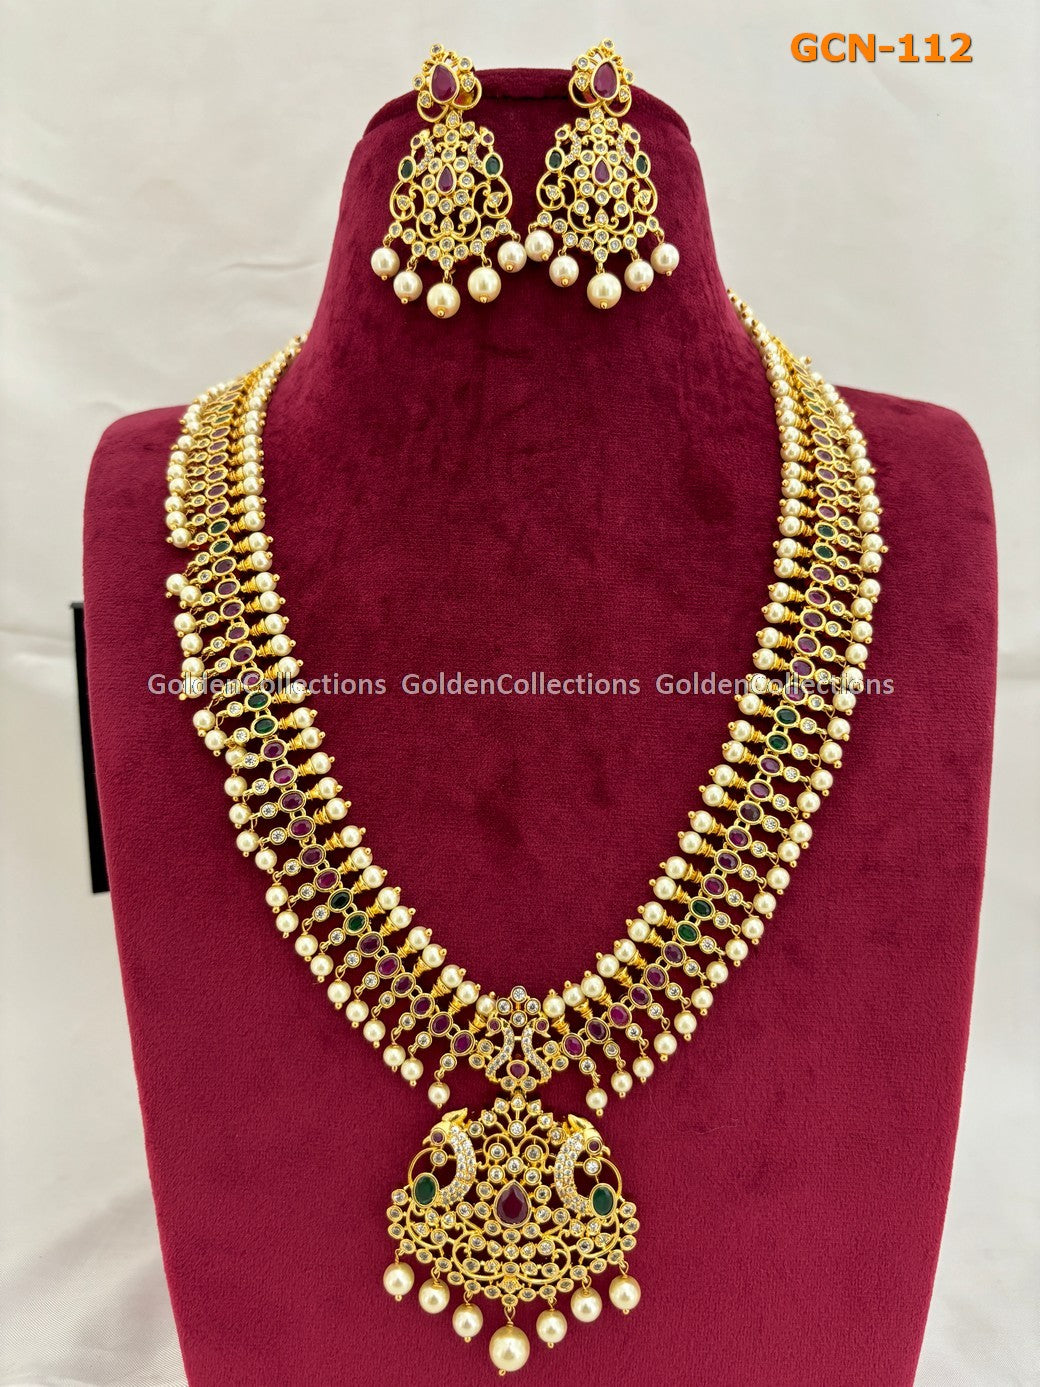 New Style Necklace Designs : Latest Fashion Necklace Designs GoldenCollections 